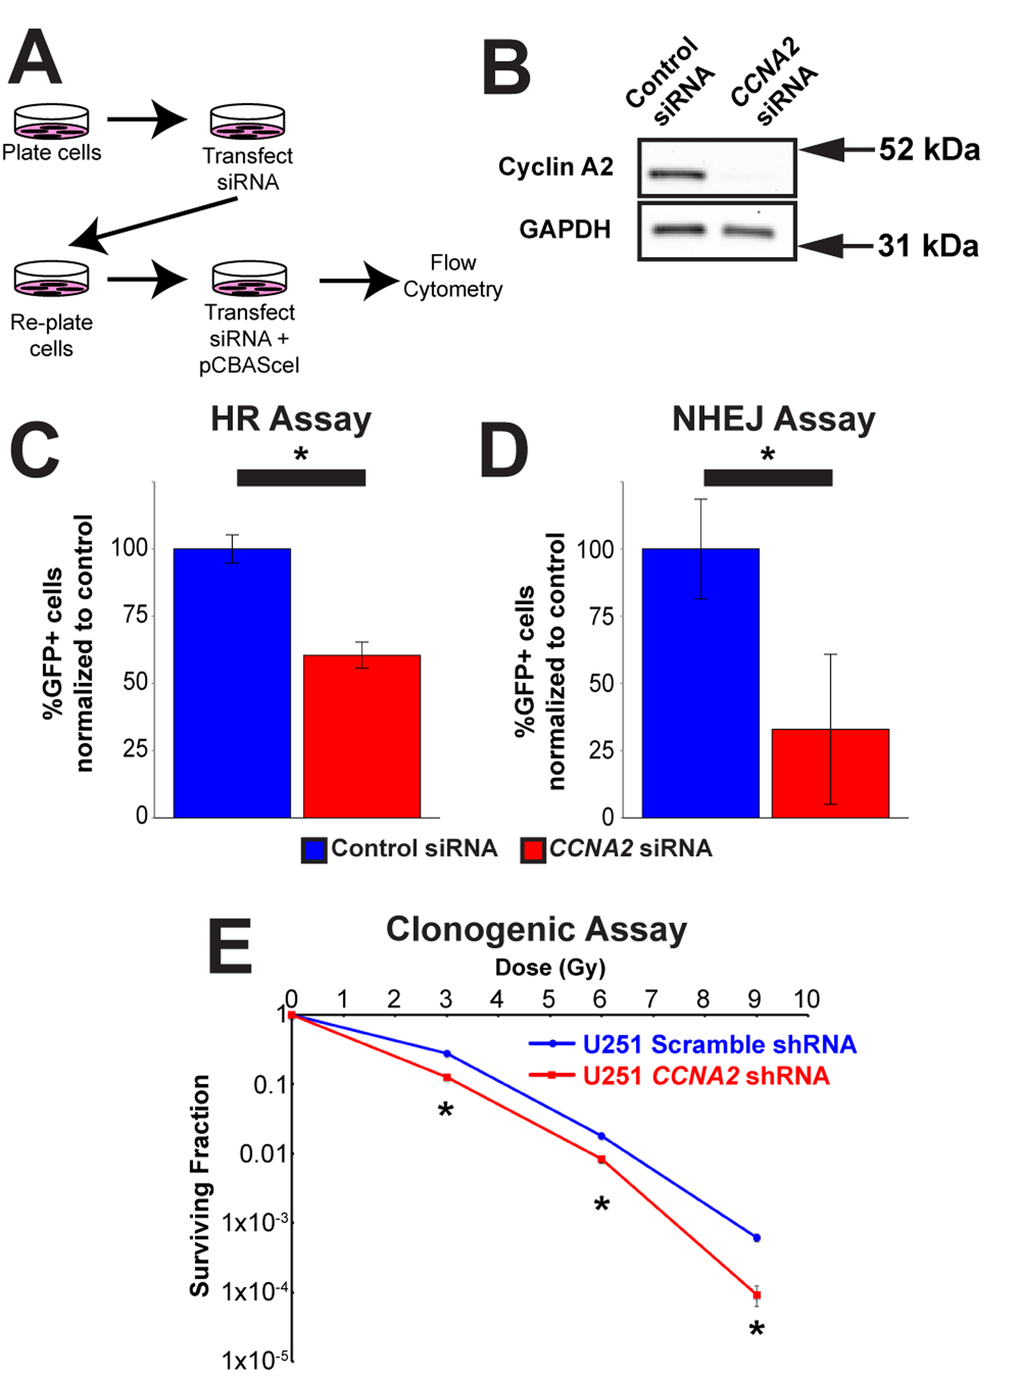 Cyclin A2 is involved in both homologous recombination and non-homologous end joining. (A) Schematic of experiments in (C) and (D). (B) Silencing of CCNA2 by siRNA was confirmed by western blot. (C) siRNA silencing of CCNA2 reduces HR. U251 cells with an integrated pDR-GFP plasmid were transfected with pCBASceI to induce a DSB in the DR-GFP locus. Cells that repaired this DSB by HR express GFP. Percentage CCNA2-silenced cells expressing GFP were normalized to percentage of control cells expressing GFP. Unpaired t-test, * = p CCNA2 reduces NHEJ. Experiments were performed as in (C), but with an integrated EJ5GFP plasmid. Unpaired t-test, * = p y-axes in (C) and (D) are the percentage of GFP-positive cells in each condition normalized to the control siRNA condition transfected with pCBASceI plasmid. Error bars represent SEM for all graphs. (E) Lentiviral silencing CCNA2 sensitizes cells to IR by clonogenic assay. CCNA2-silenced cells demonstrate reduced survival compared to control cells with scrambled shRNA. The x-axis is dose, and the y-axis is surviving fraction. Unpaired t-test at each dose, * = p 